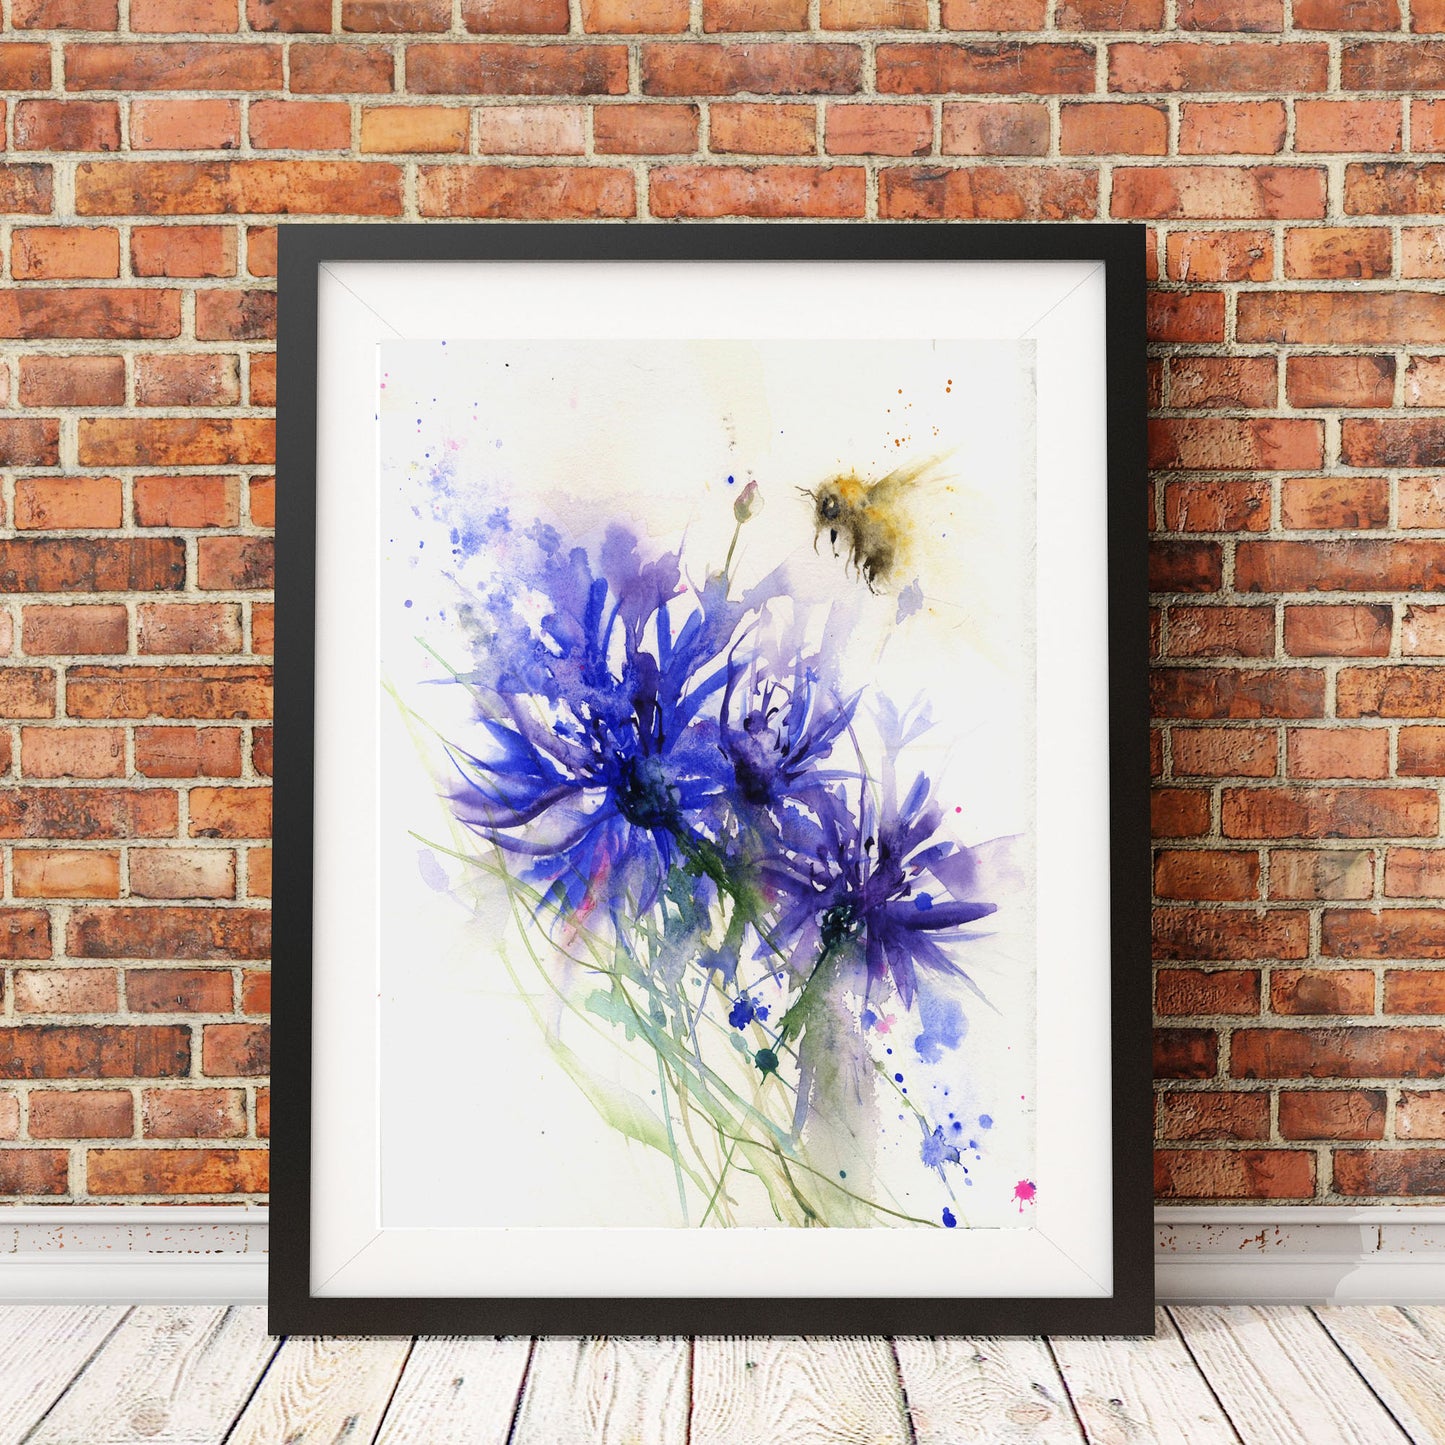 Limited edition print "bee and the cornflower" - Jen Buckley Art limited edition animal art prints